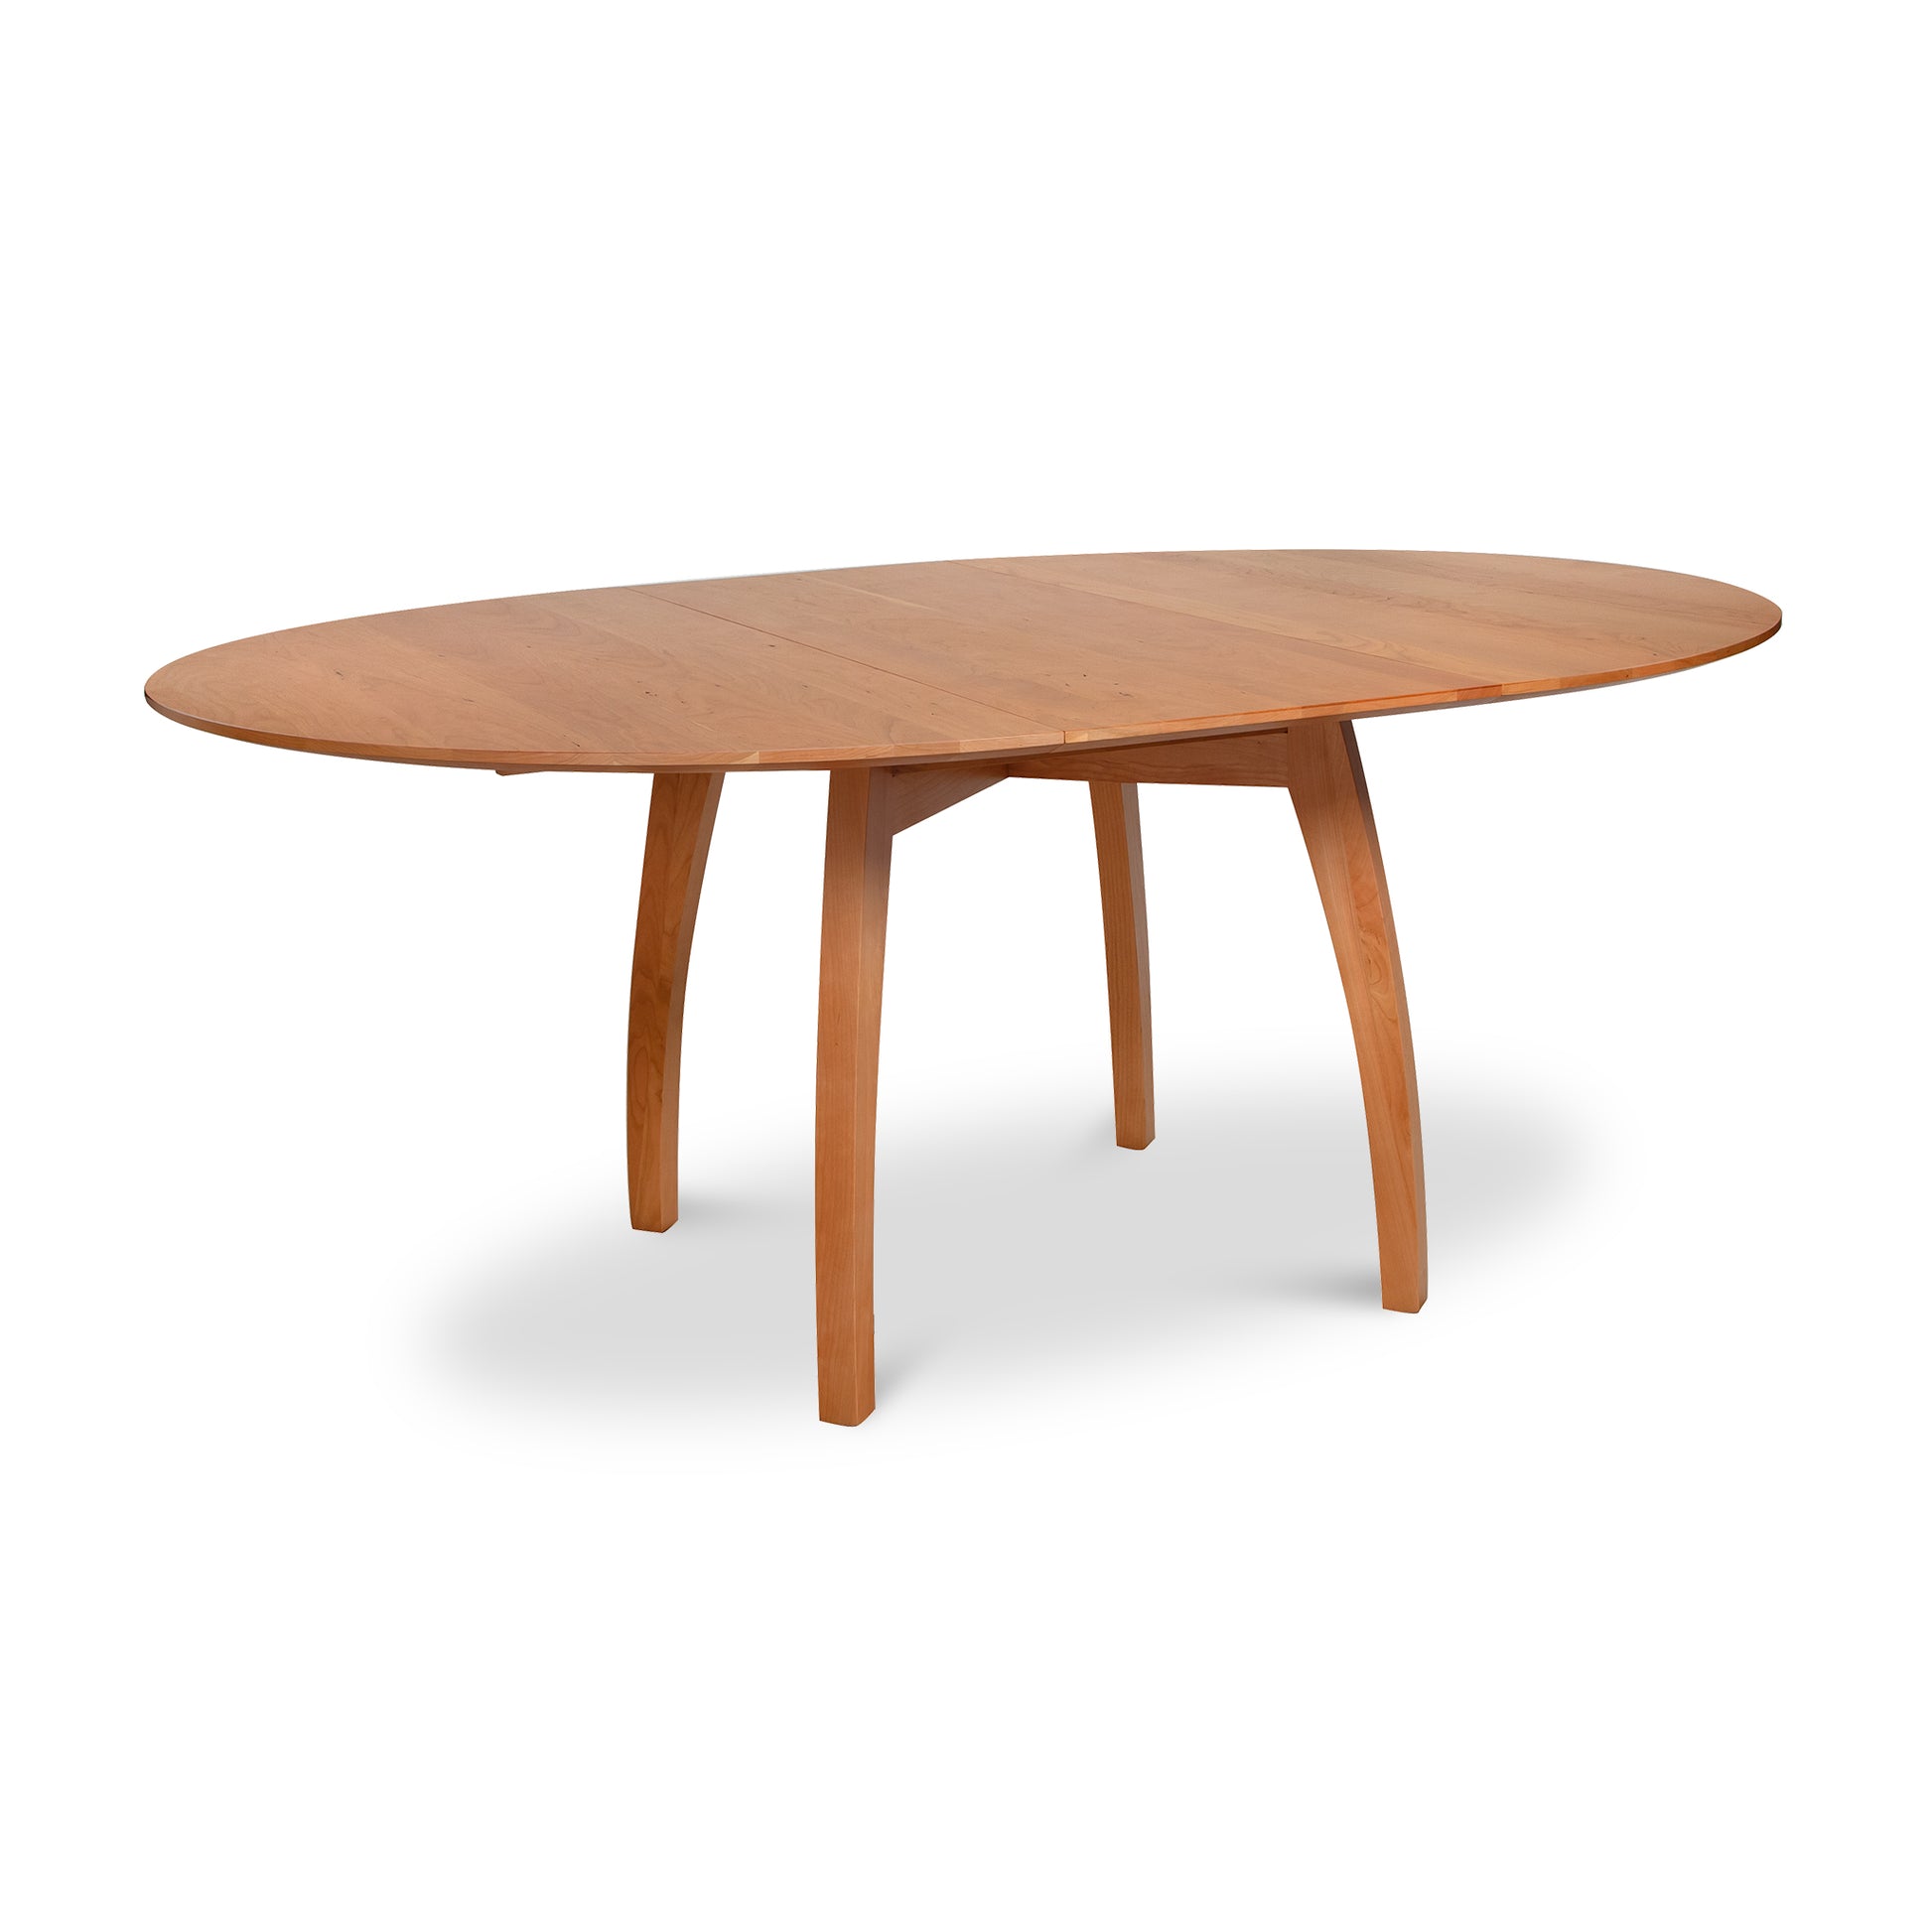 A Vermont Modern 54" Pedestal Extension Table - Floor Model with solid wood construction.